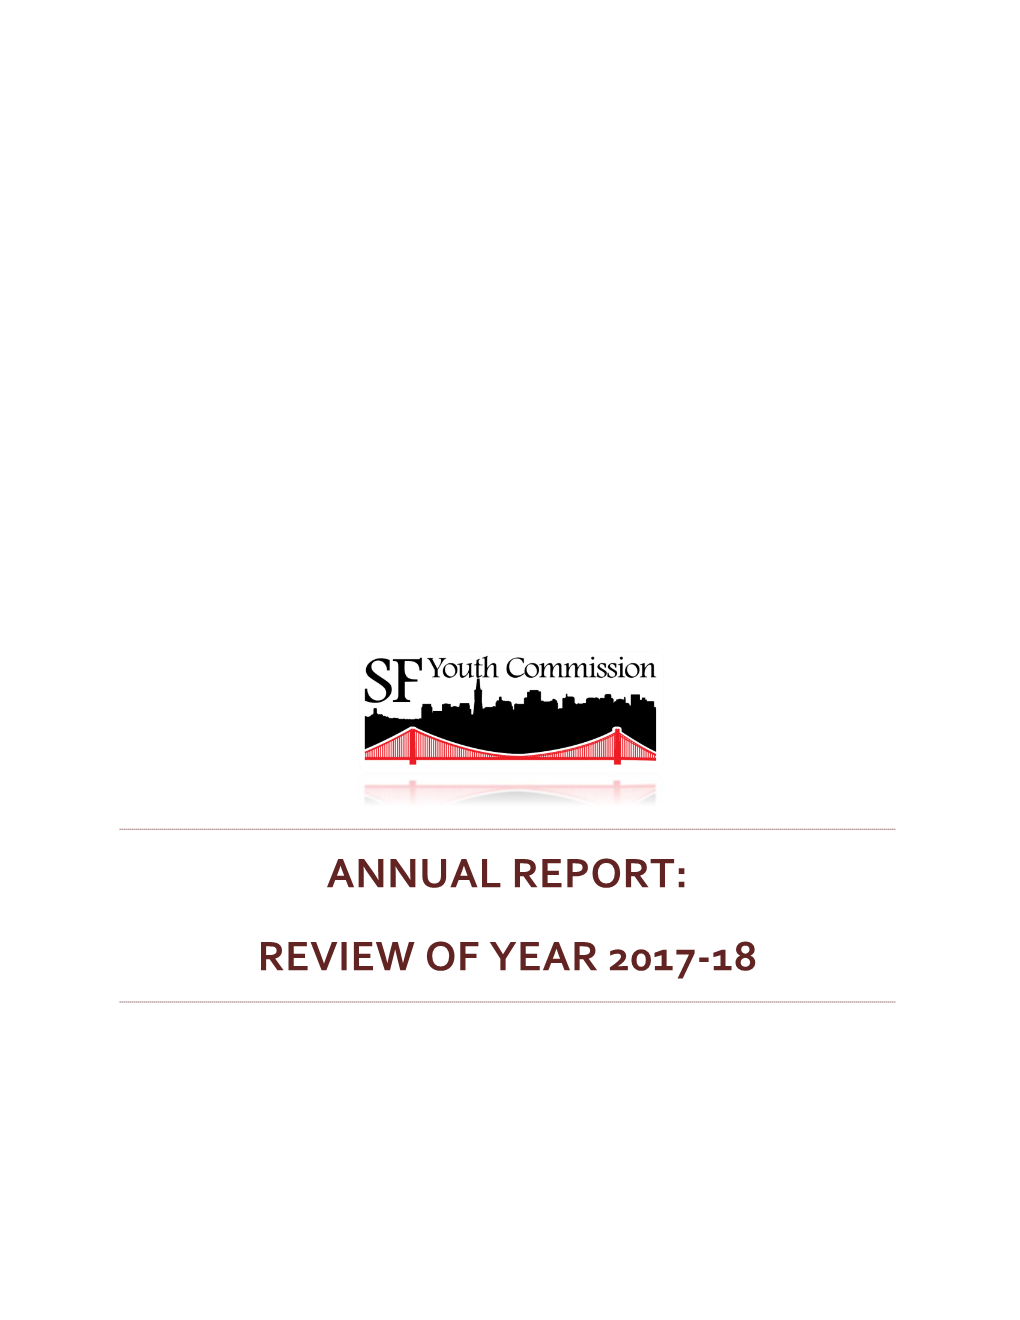 Annual Report: Review of Year 2017-18